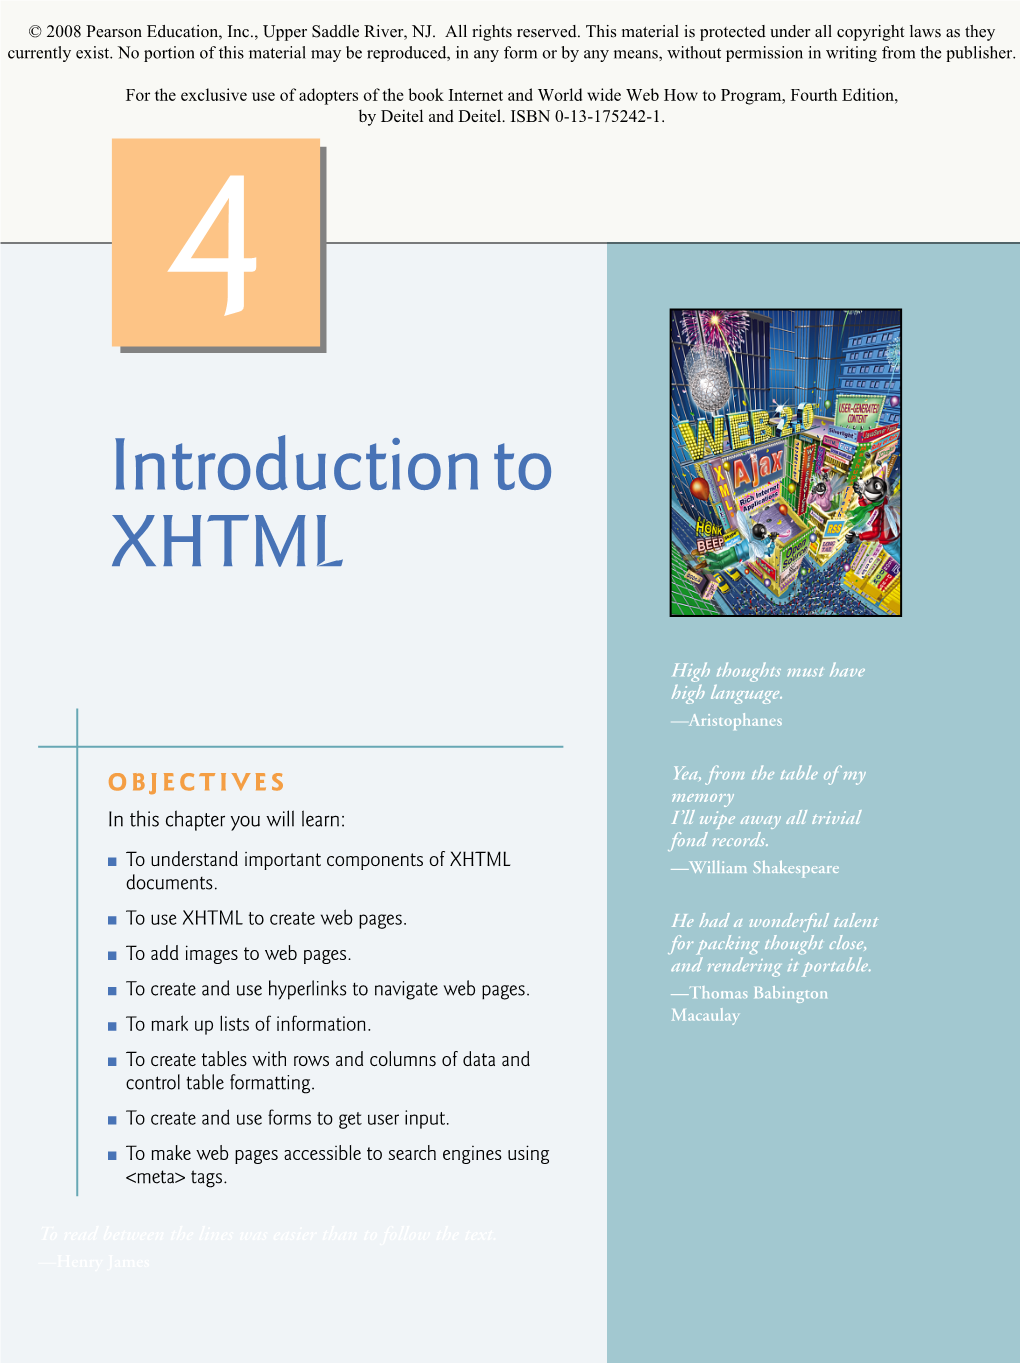 Introductionto XHTML